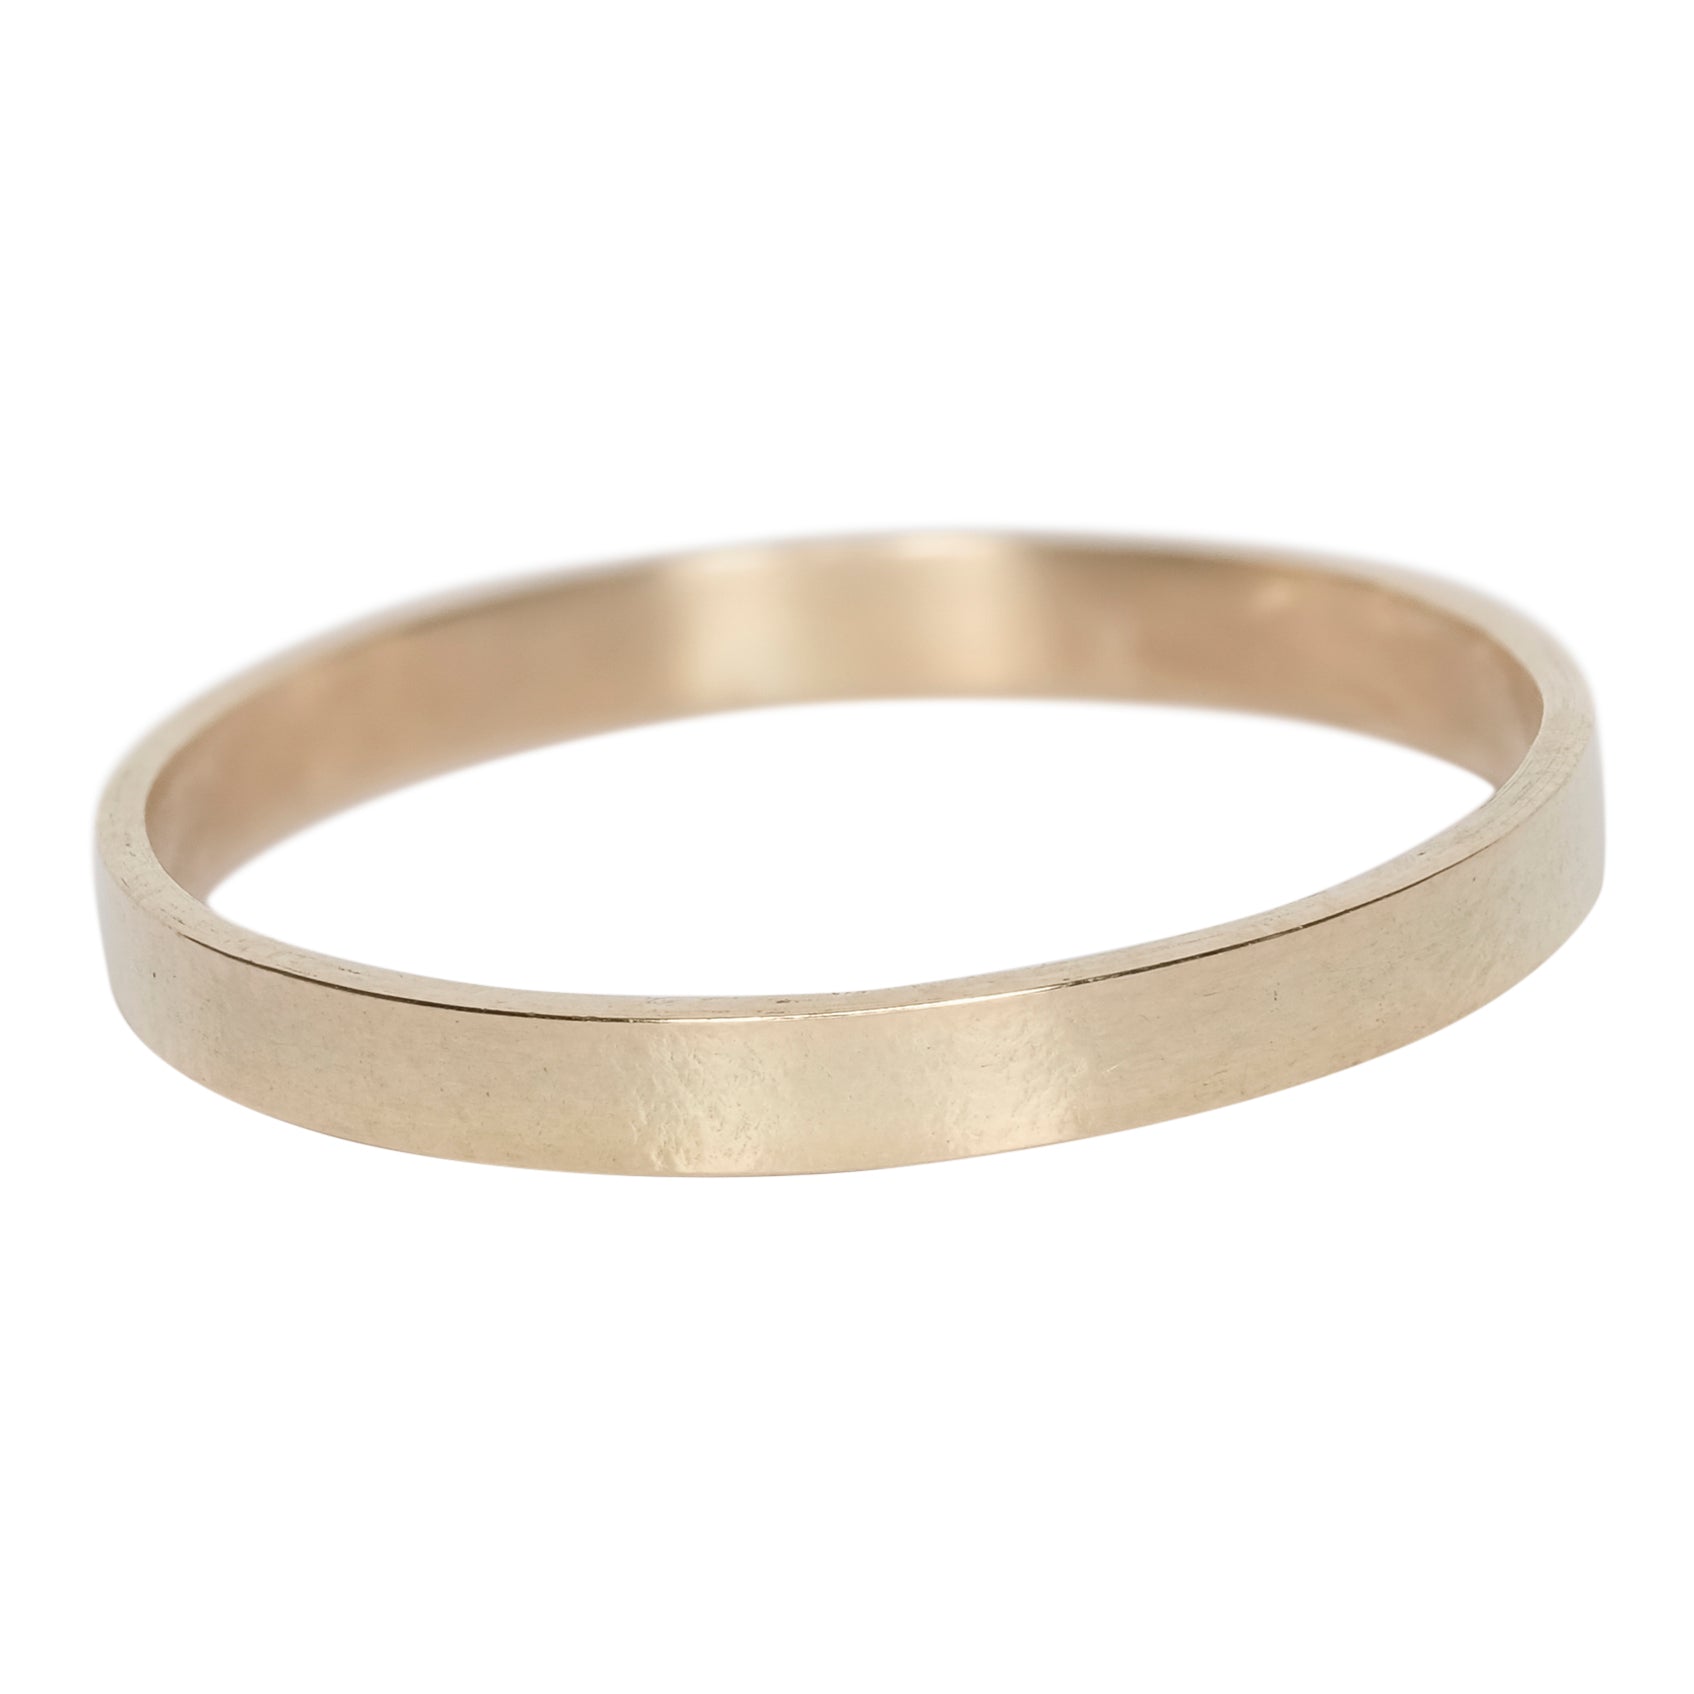 Wide imprinted band ring